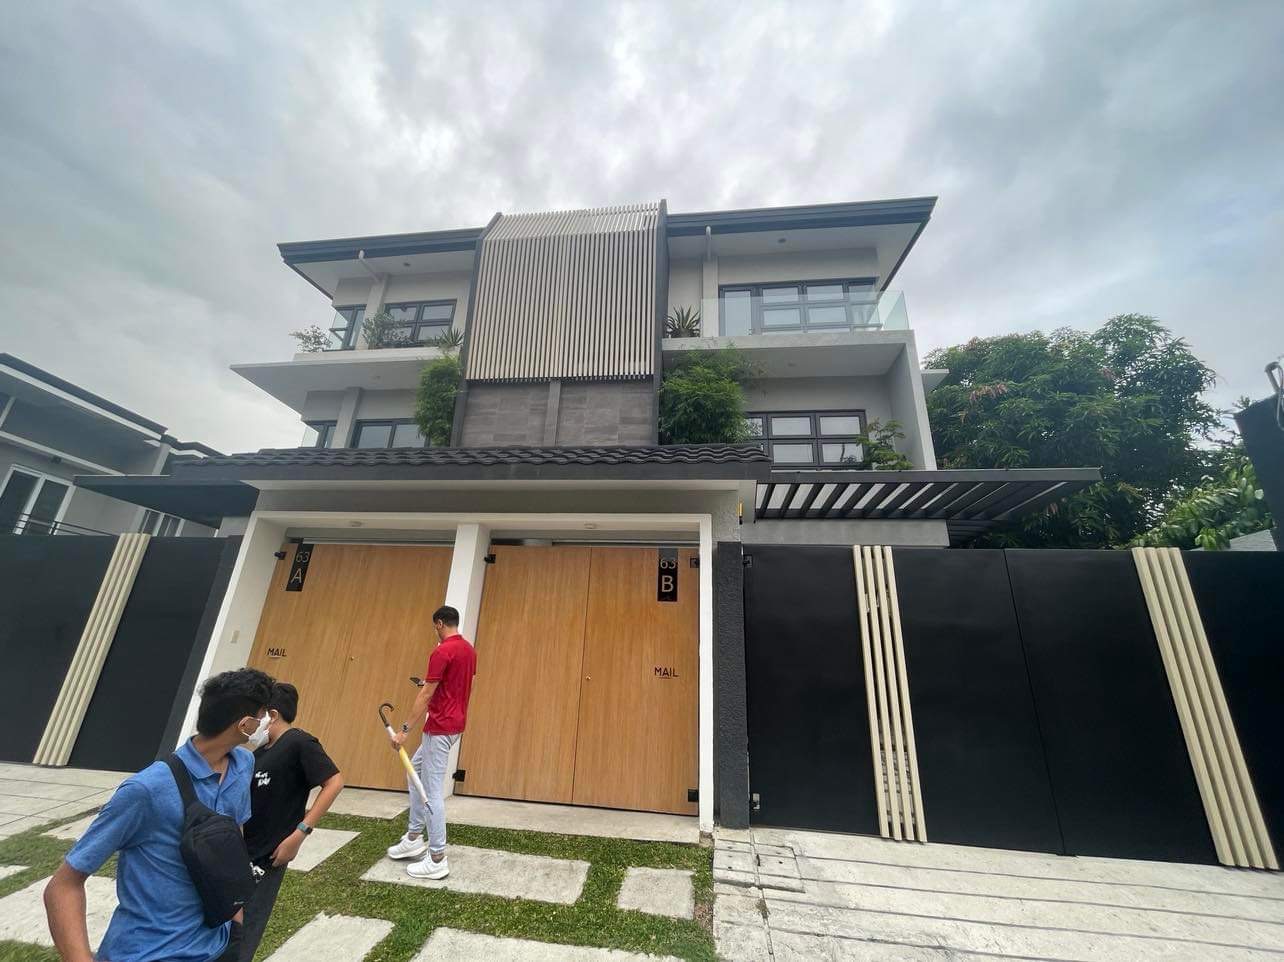 FOR SALE: Afpovai Subdivision Muji Style Duplex Home with Elevator‼️